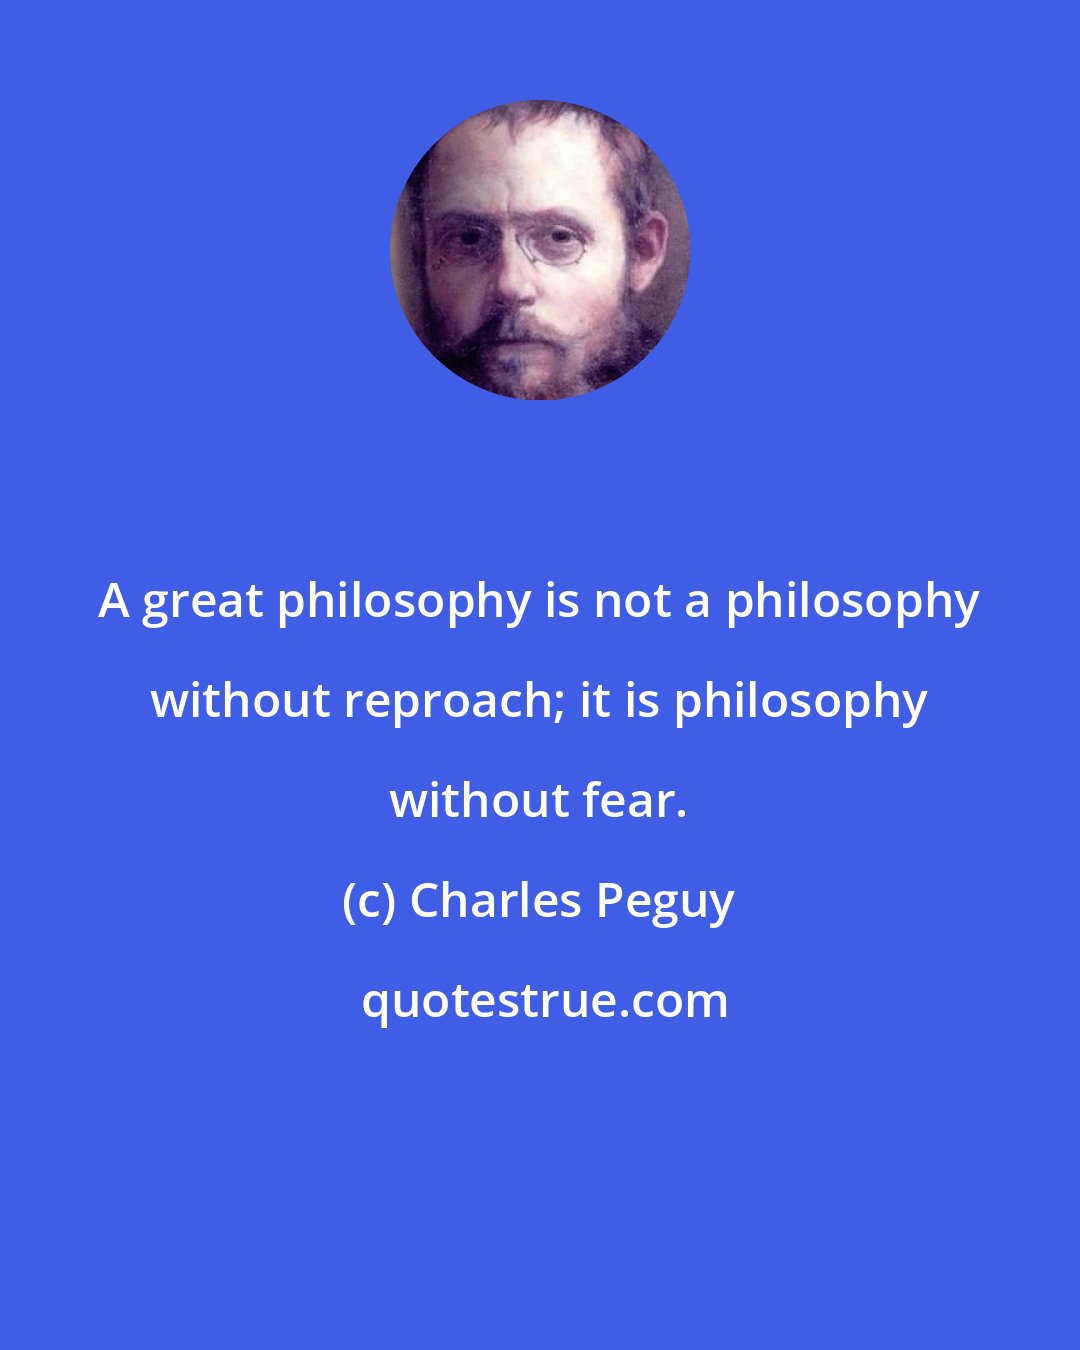 Charles Peguy: A great philosophy is not a philosophy without reproach; it is philosophy without fear.